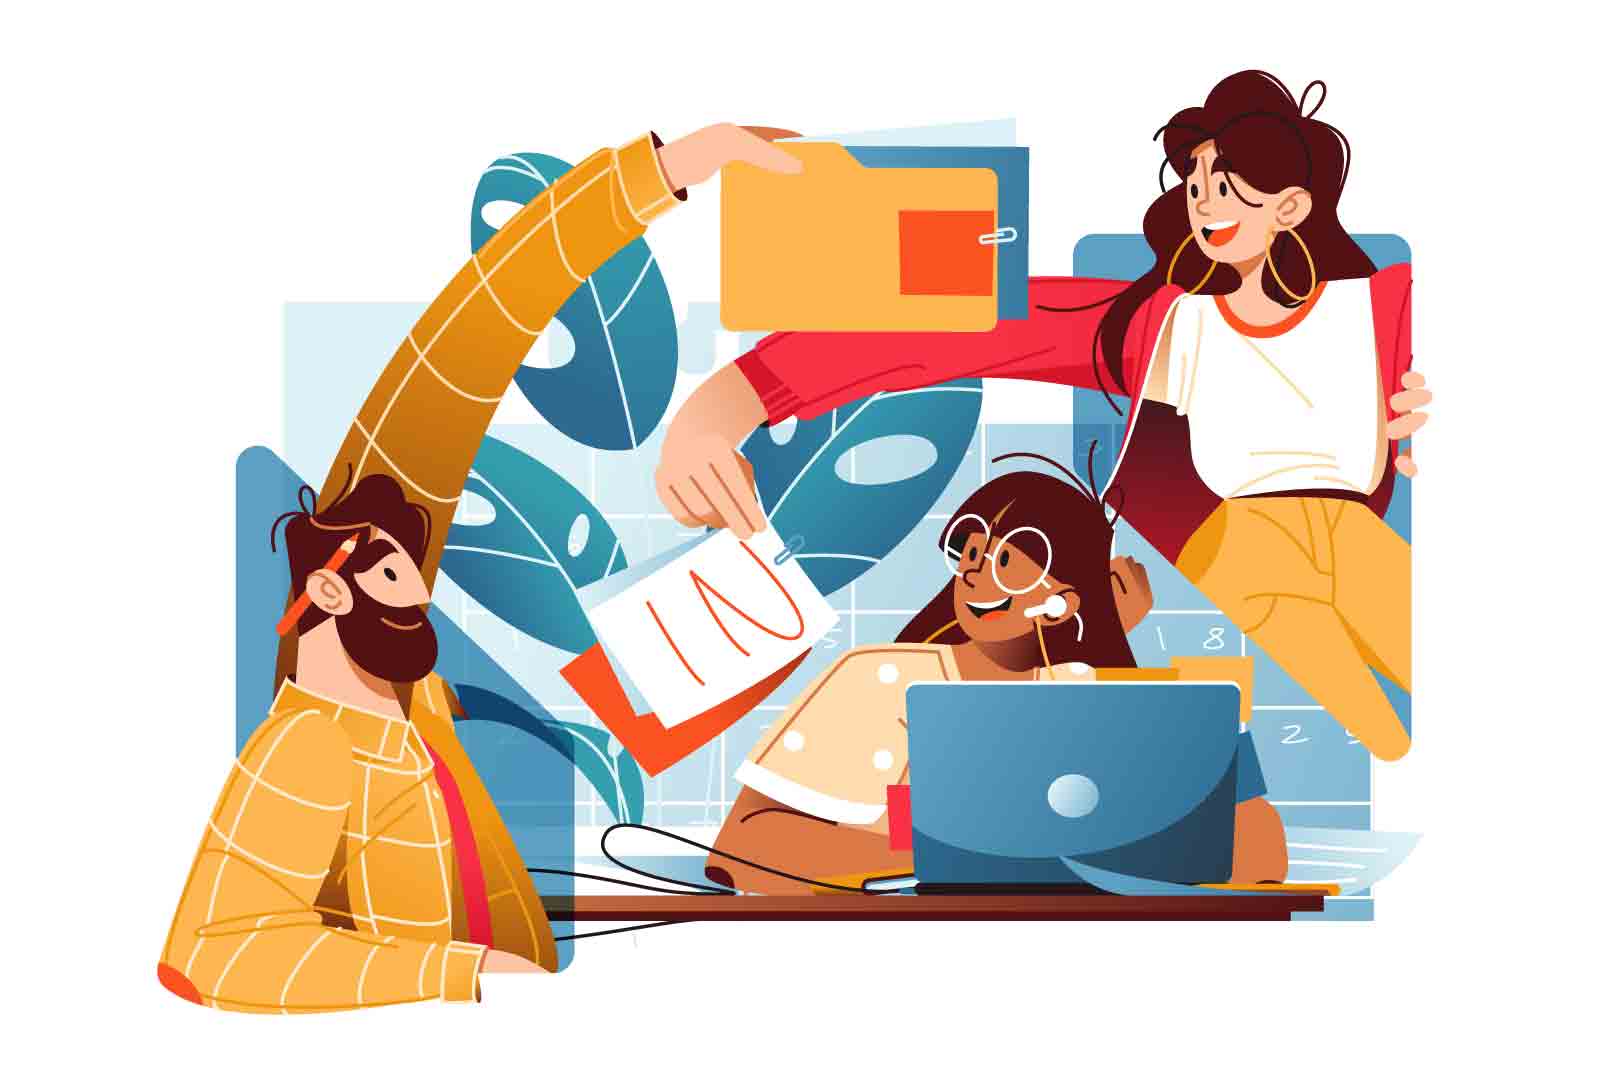 Team of three colleagues discuss and exchange documents in a modern office, vector illustration. Collaborative work, efficiency and productivity.